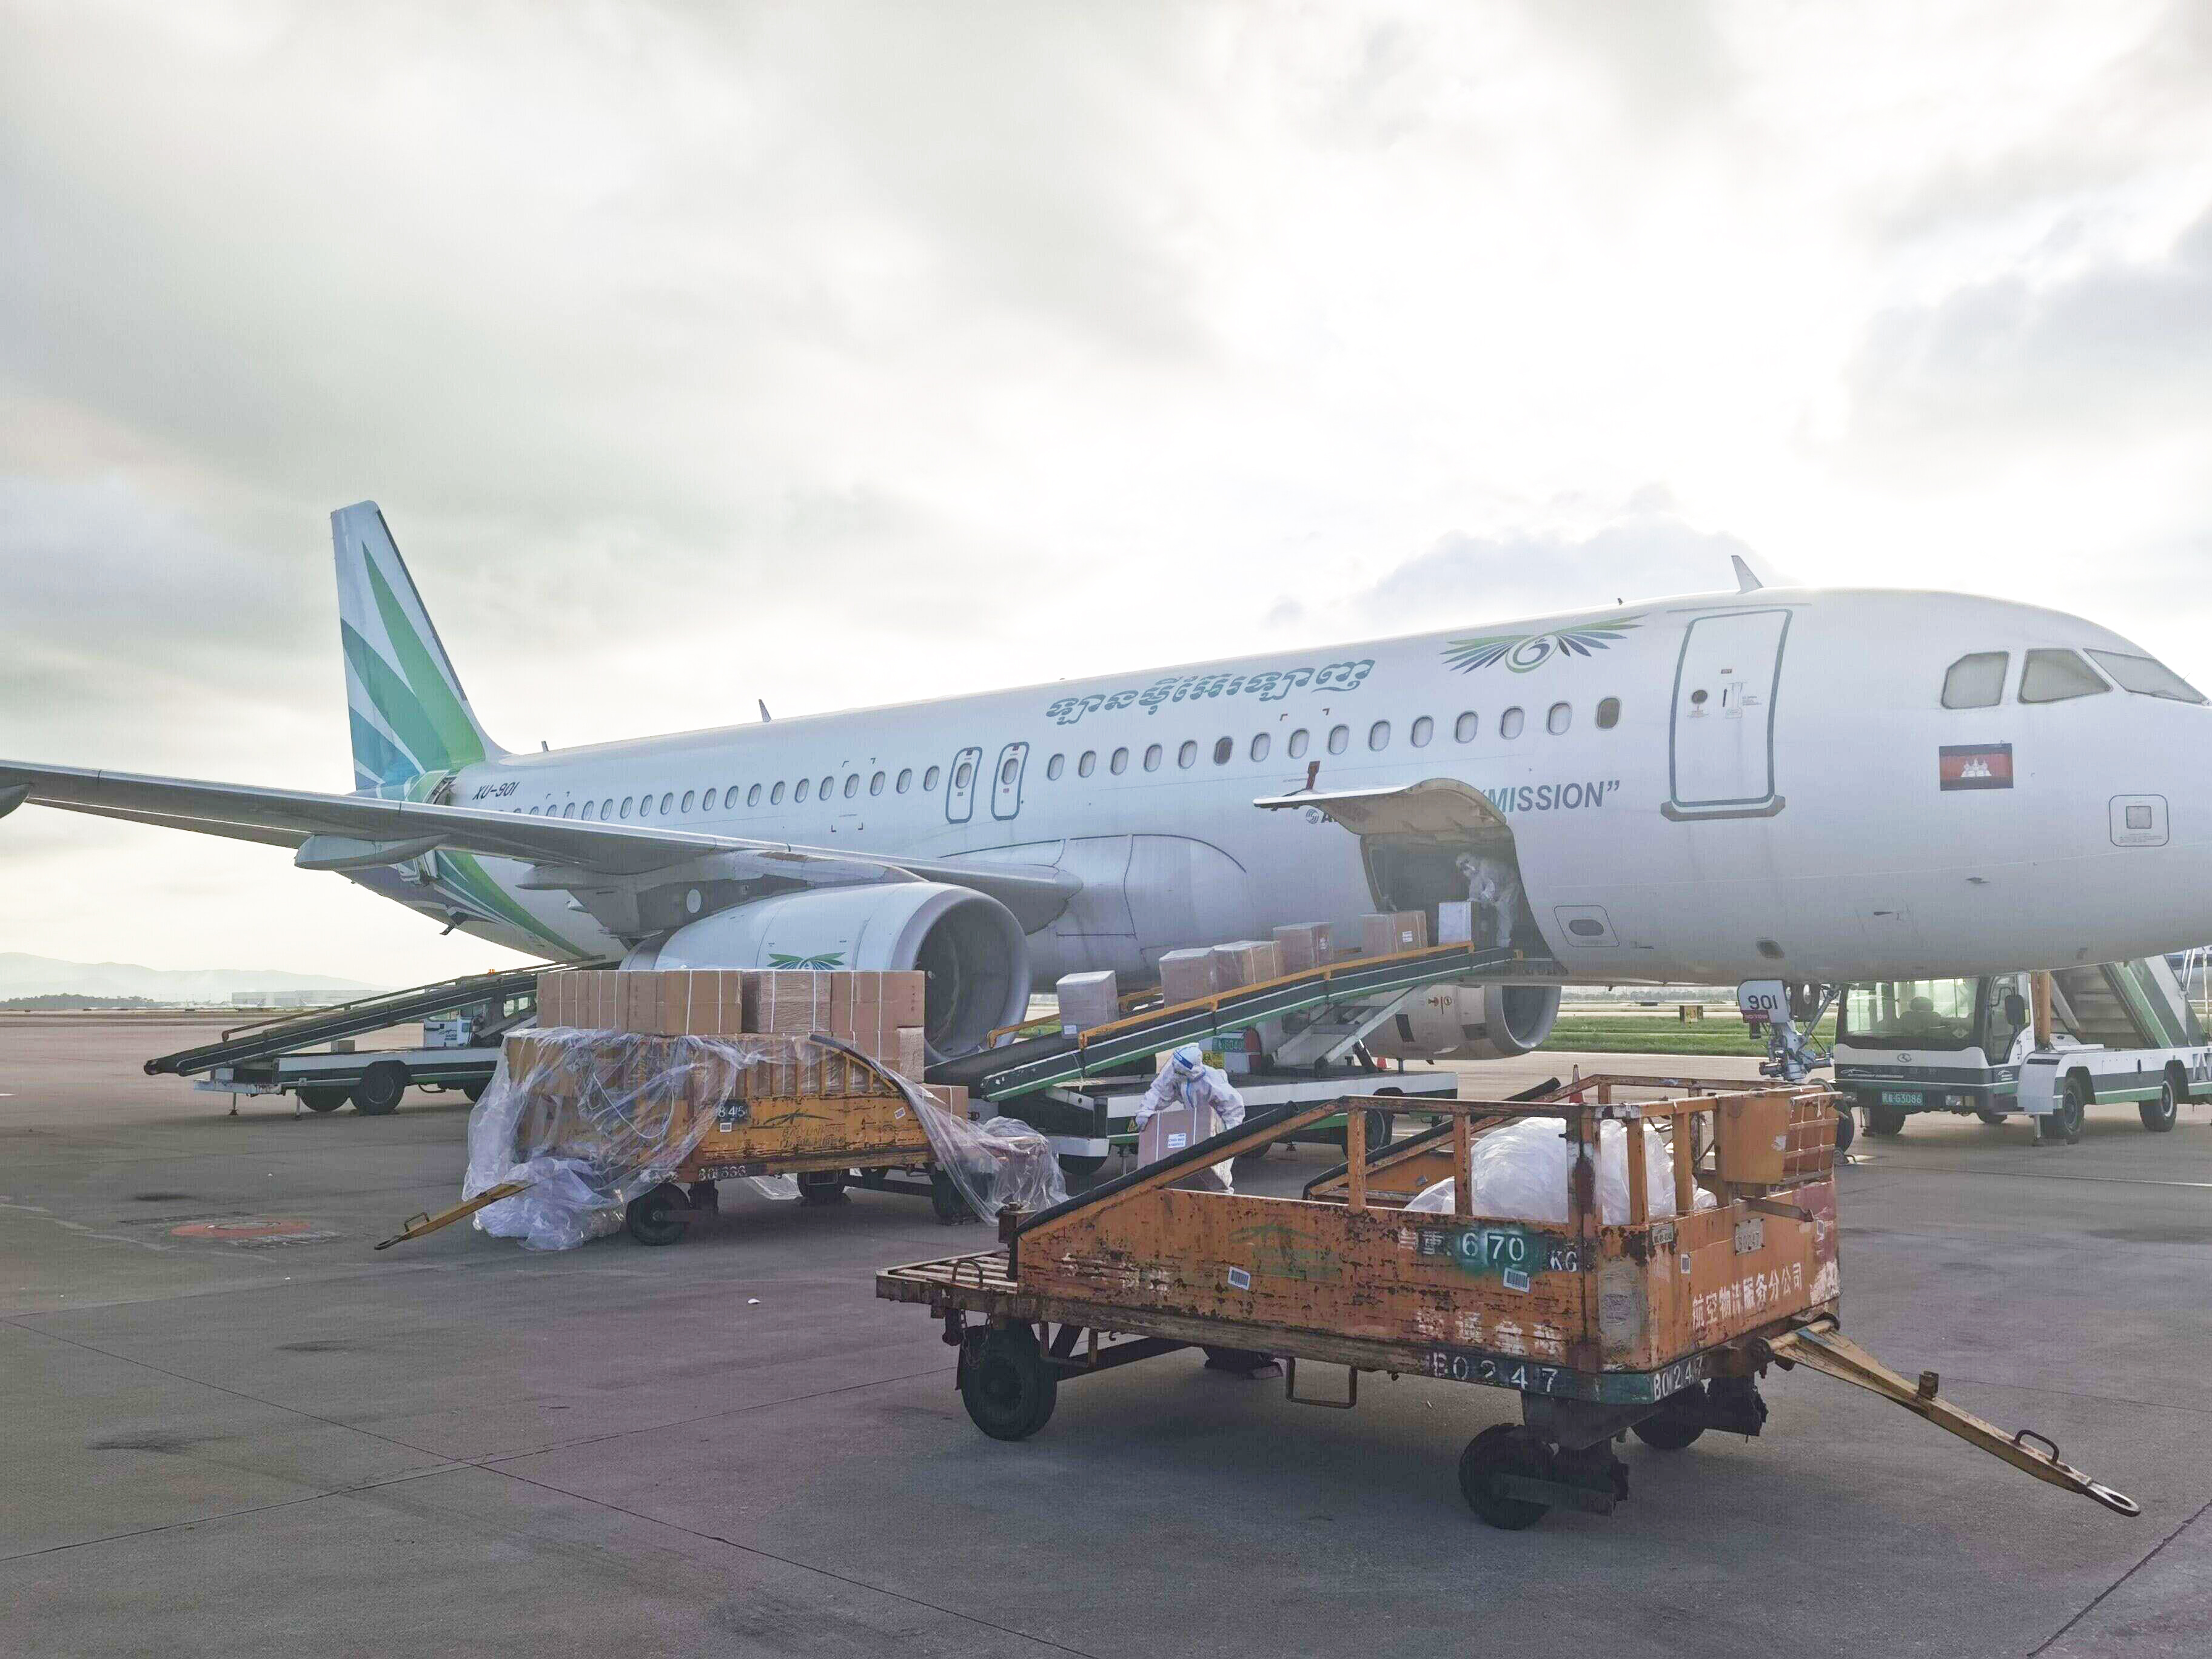 Freight forwarder Guangzhou China air freight door to door delivery to Philippines